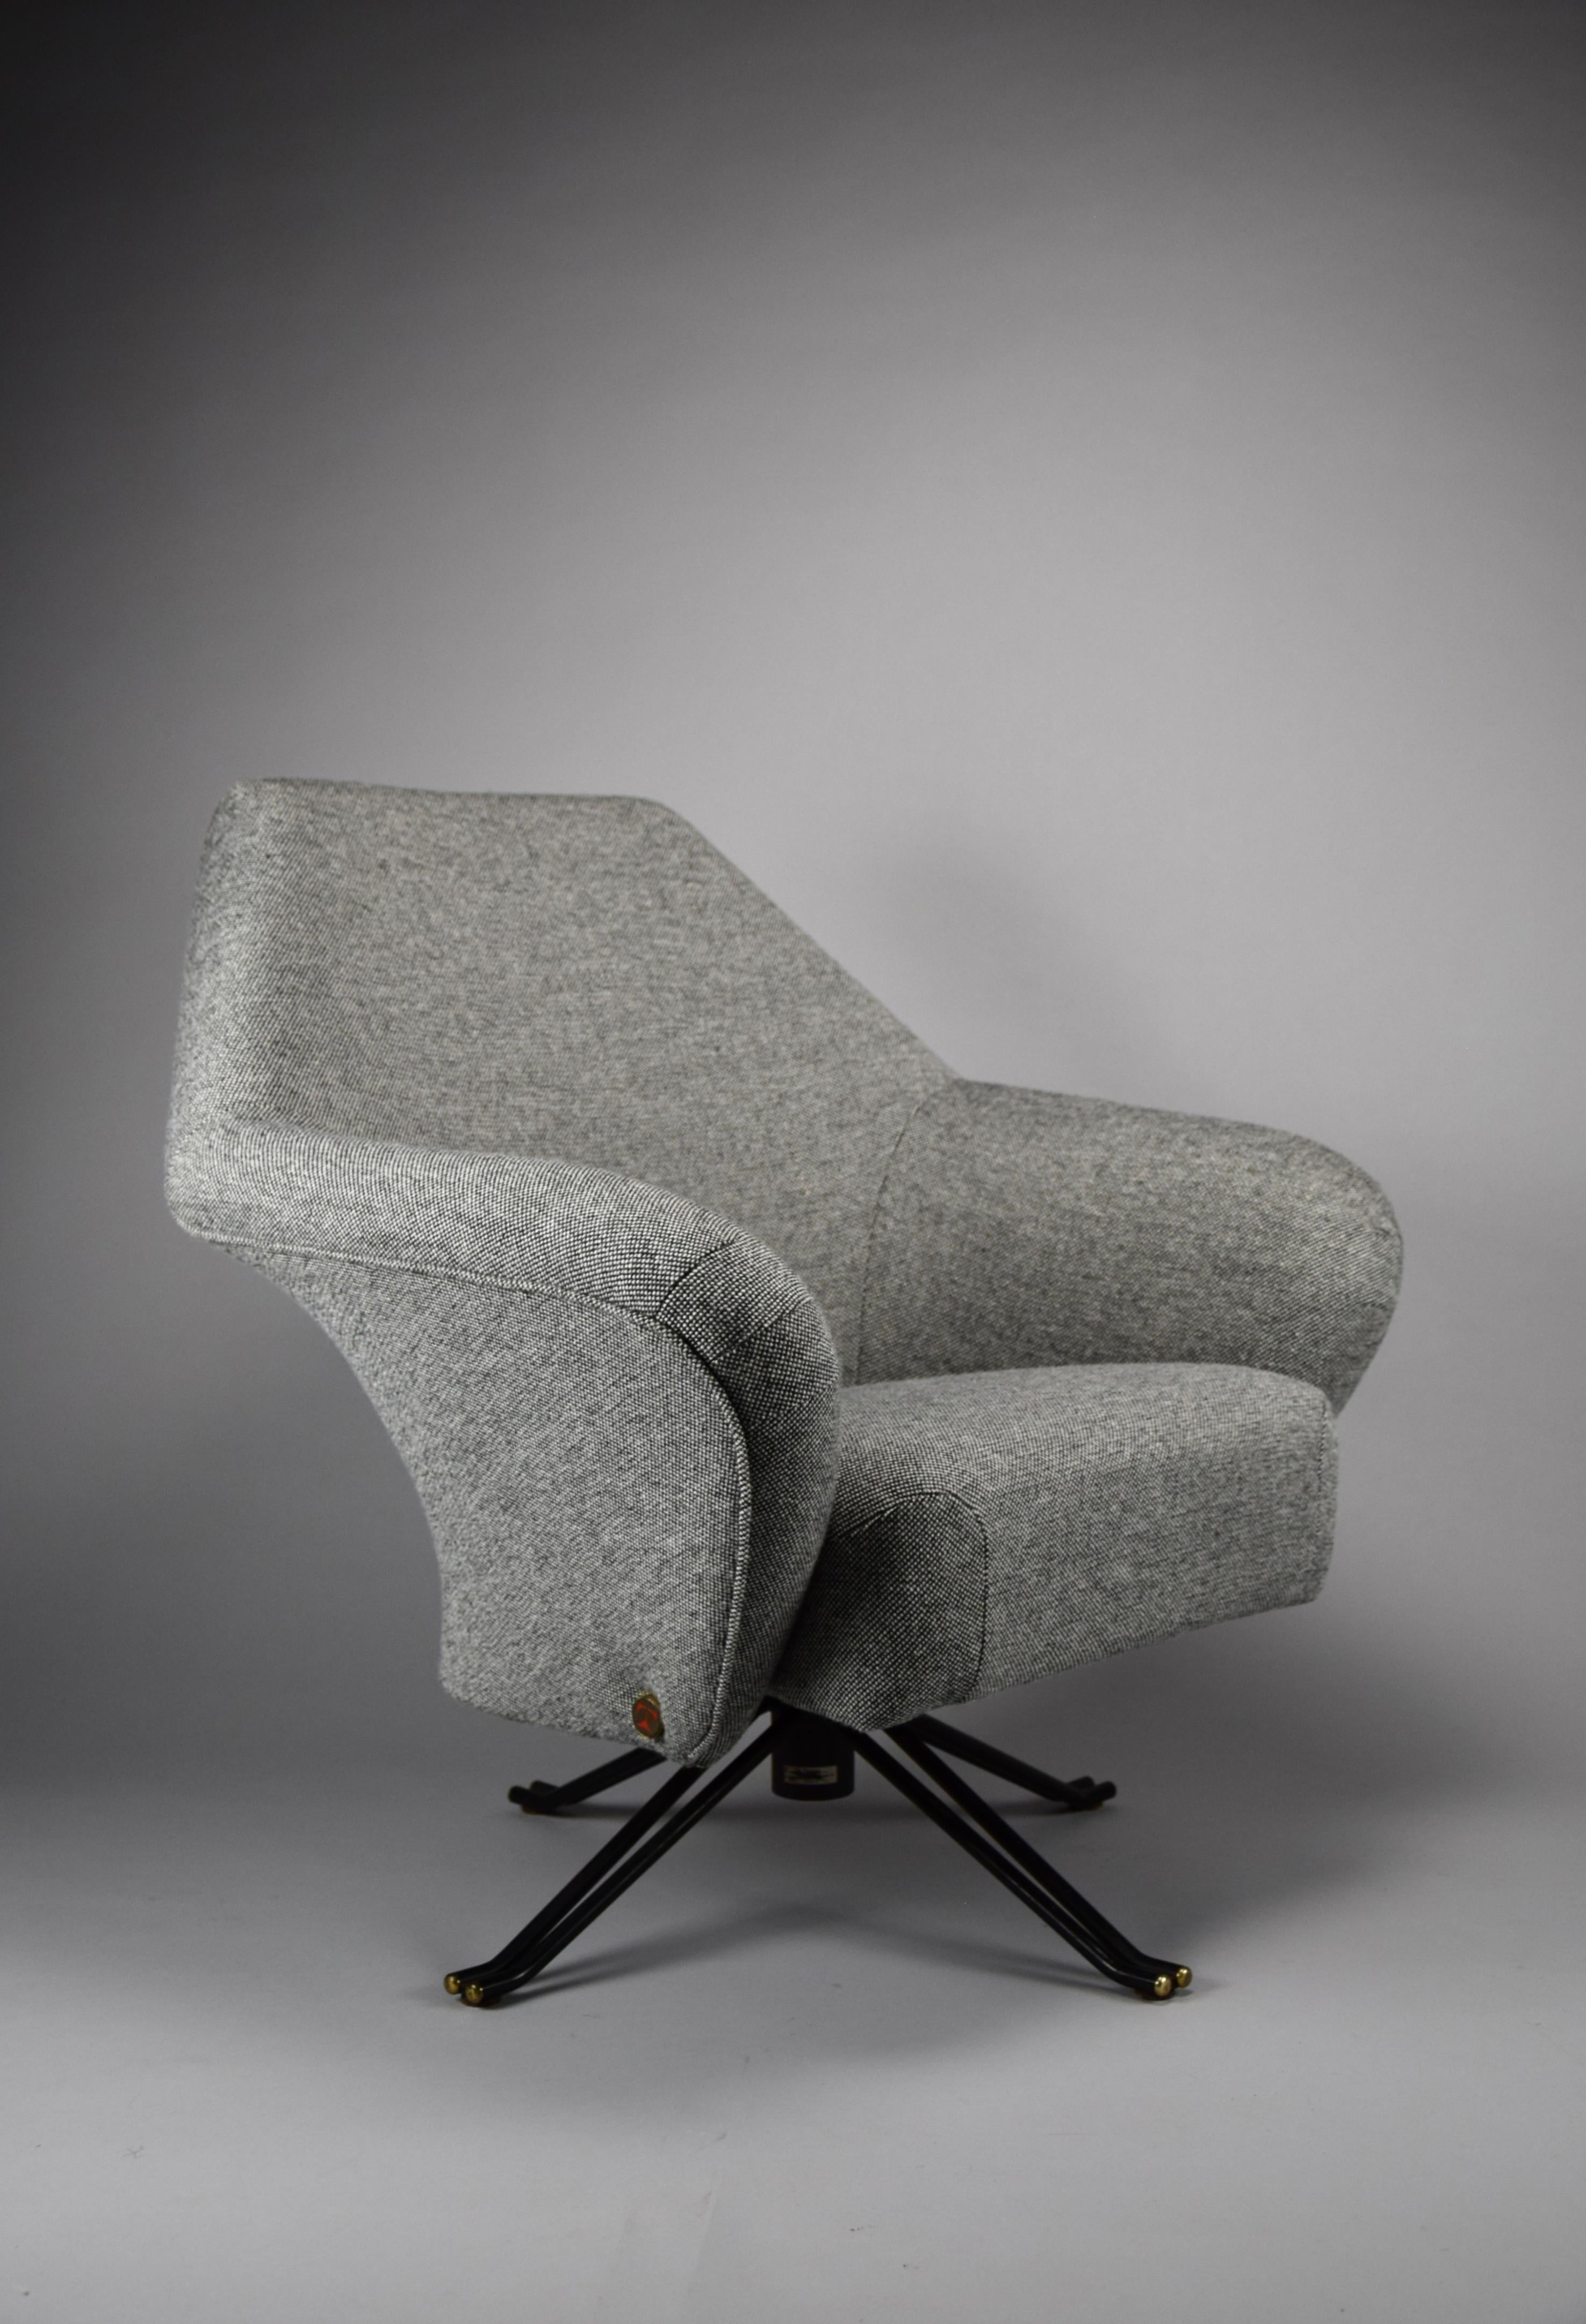 Introducing the P32 Elegant Lounge Chair: Timeless Comfort, Unmatched Elegance

Step into the world of mid-century Italian design with the P32 Elegant Lounge Chair, a masterpiece created by Osvaldo Borsani in 1956 and proudly produced by Tecno